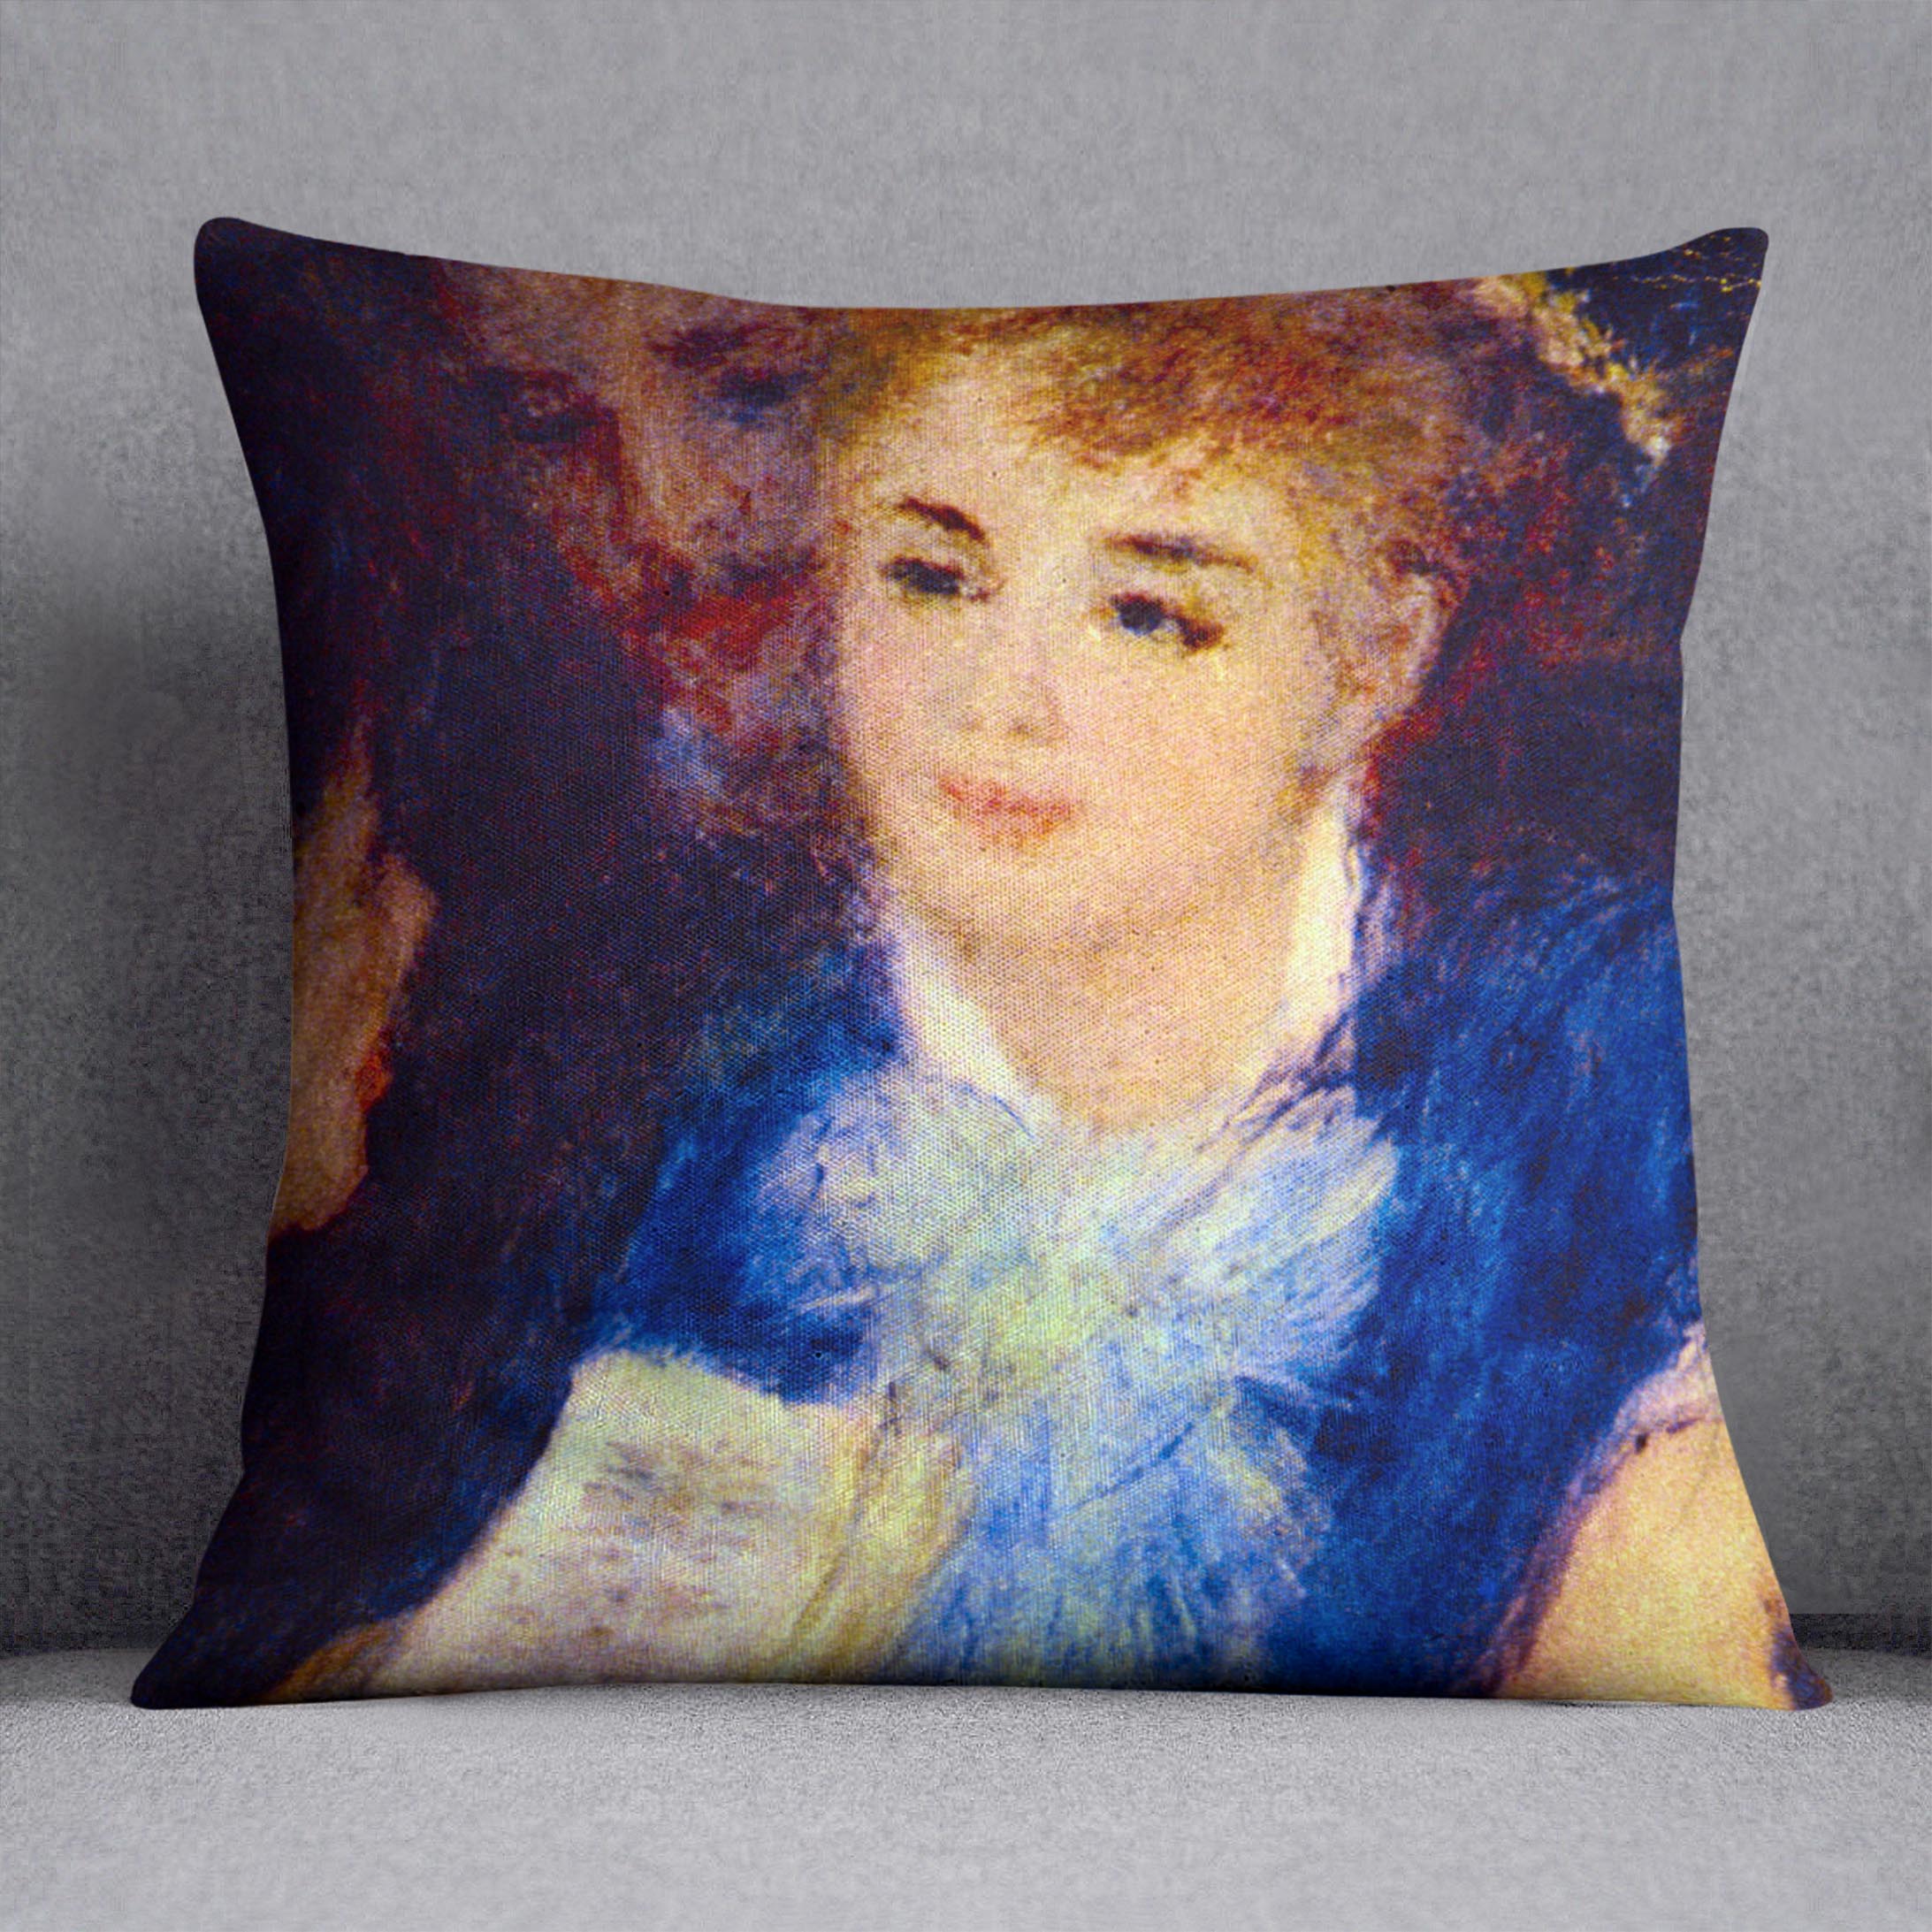 The Perusal of the Part by Renoir Cushion